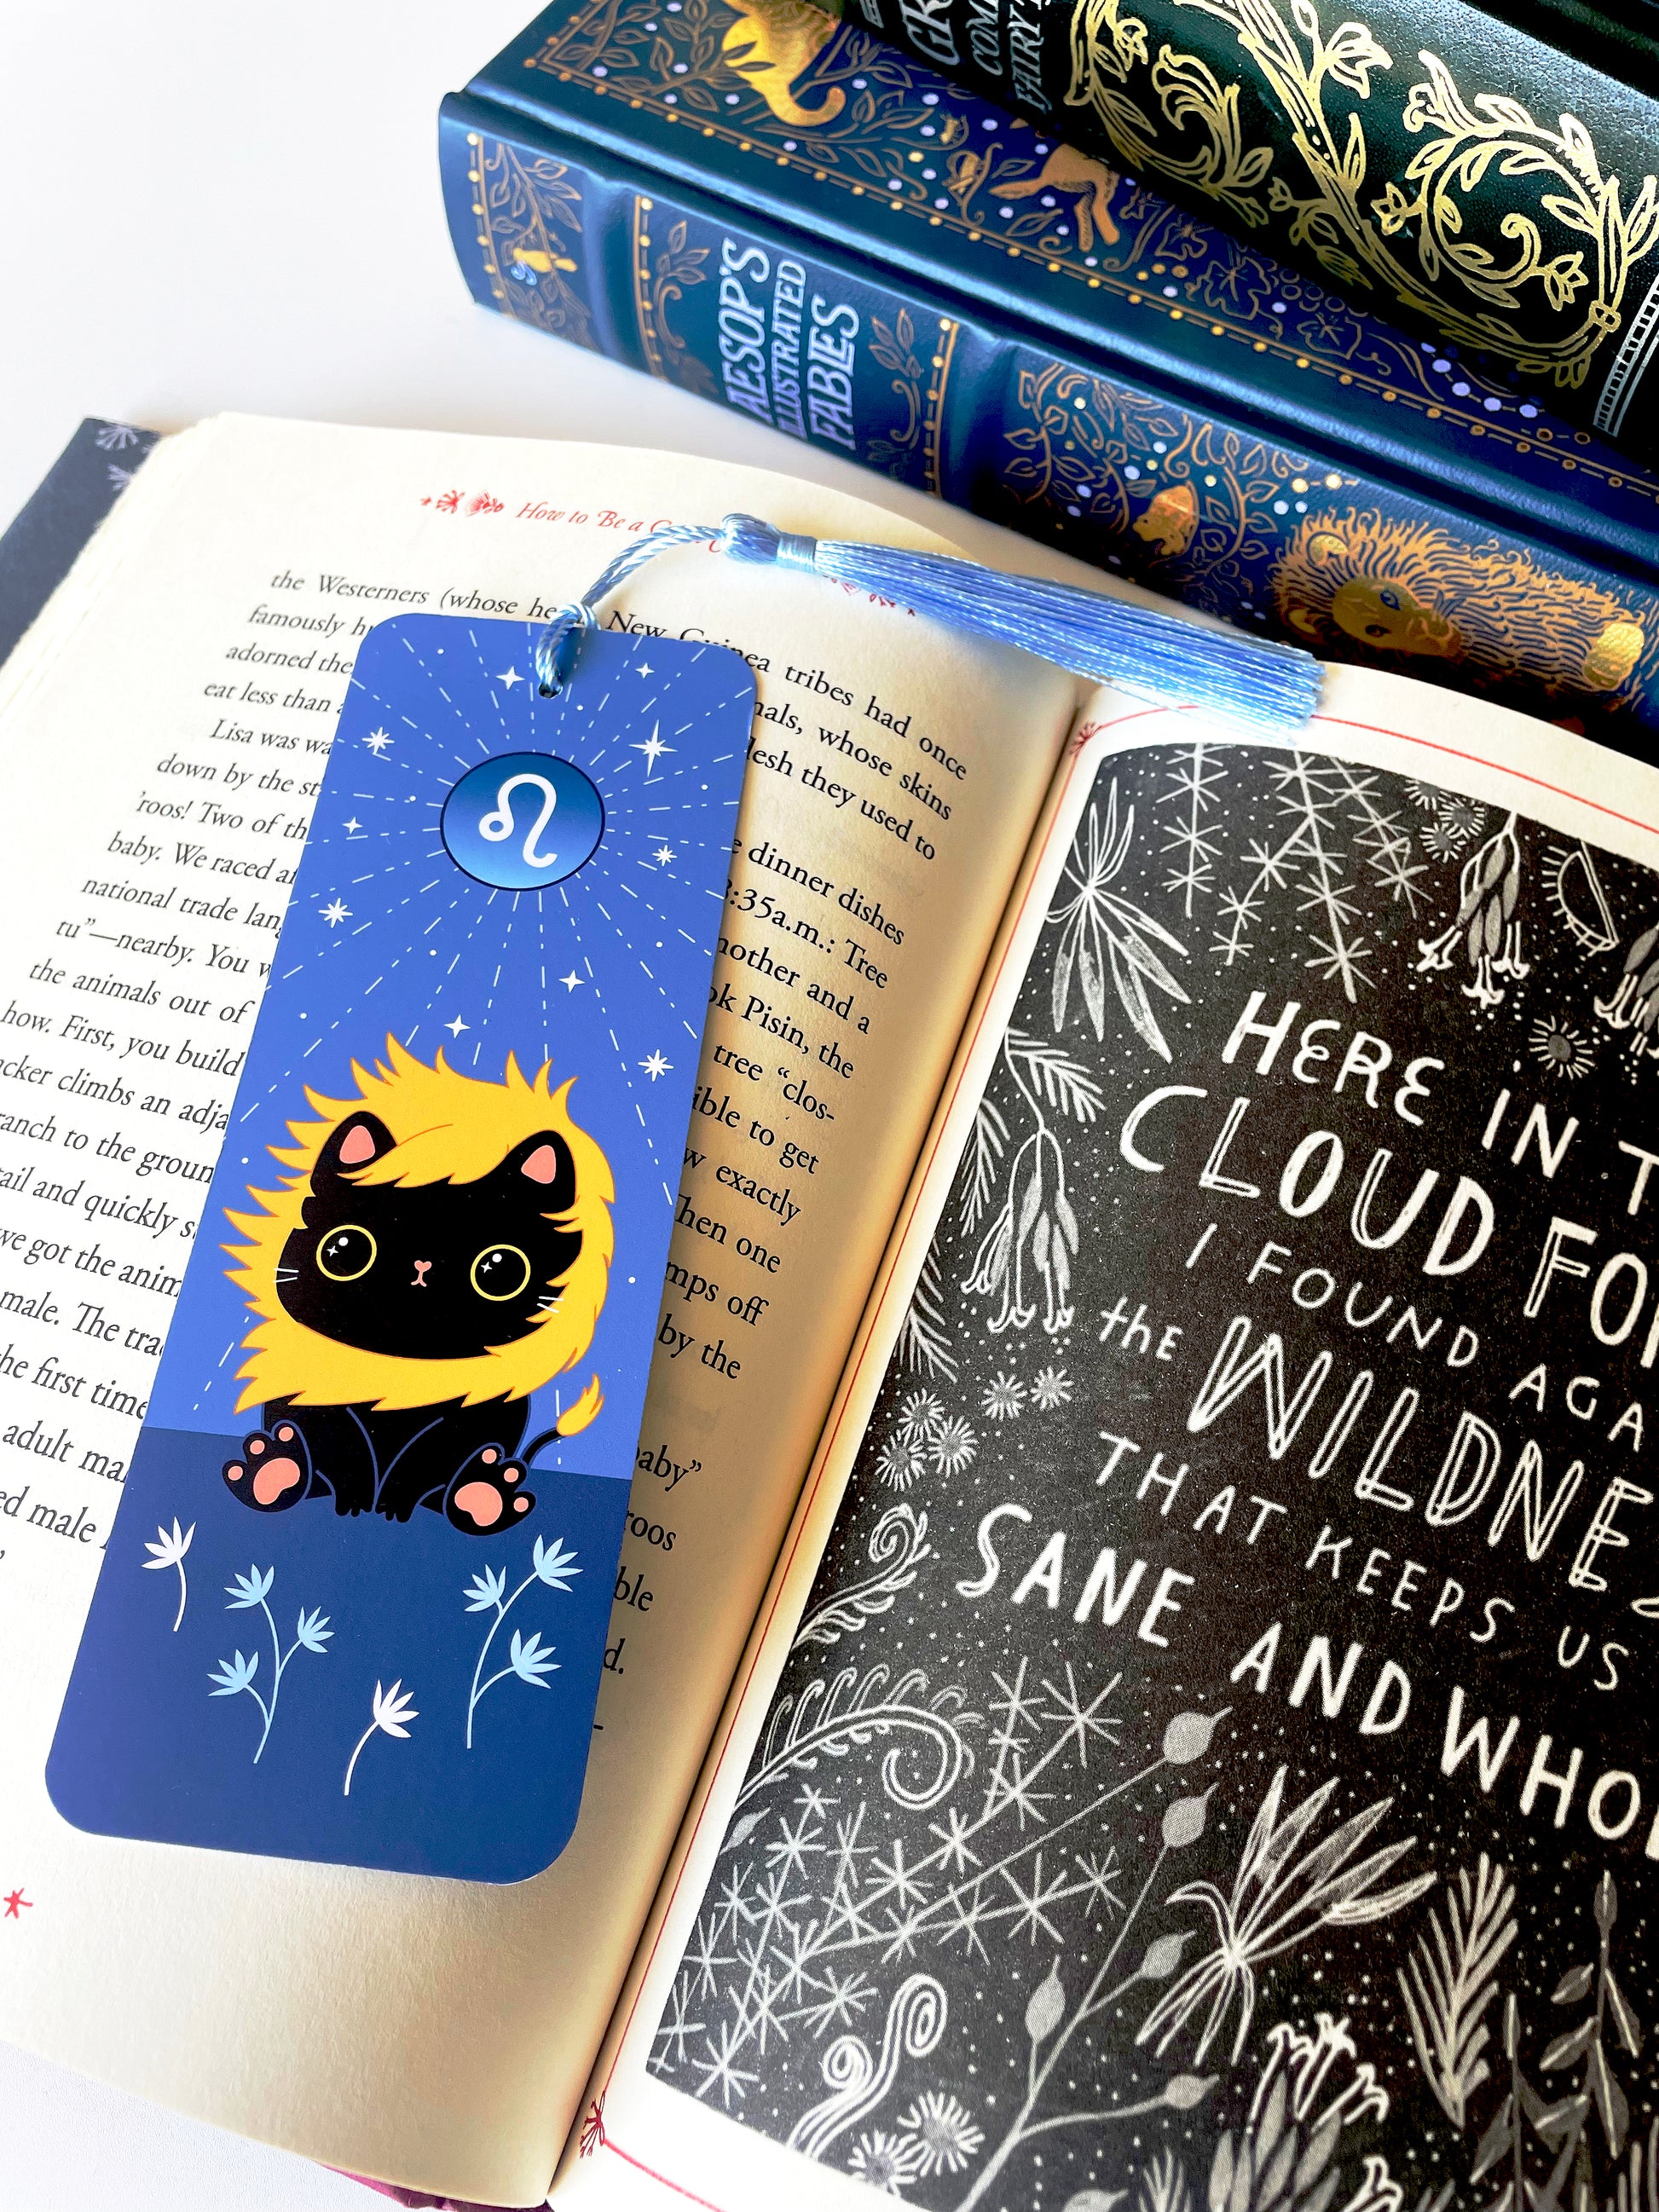 Zodiac sign Leo cat bookmark being shown on a book page